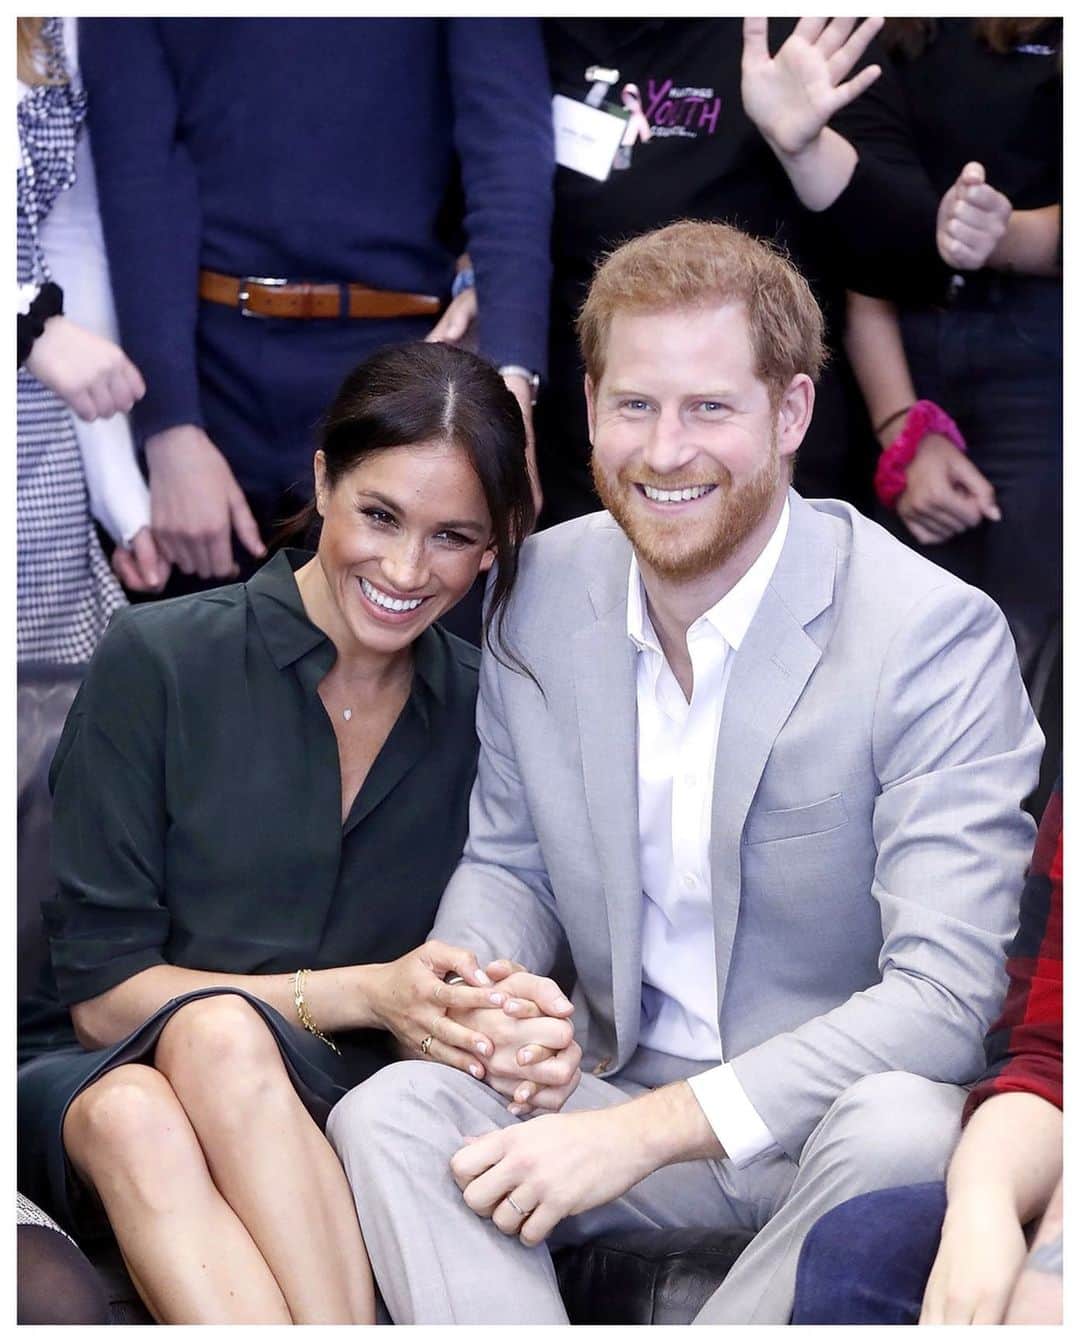 英ヘンリー王子夫妻のインスタグラム：「Today, we are excited to be able to announce details for the Duke and Duchess of Sussex’s upcoming tour to Africa! 🇿🇦🇧🇼🇦🇴🇲🇼 • In just two weeks, Their Royal Highnesses will embark on this official tour focusing on community, grassroots leadership, women’s and girls’ rights, mental health, HIV/AIDS and the environment.  This programme has been many months in the making, and The Duke and Duchess are eager to focus their energies on the great work being done in Southern Africa.  From meeting with Archbishop Desmond Tutu to joining ‘Waves for Change’ on Monwabisi Beach, the South Africa programme will be educational and inspiring.  The Duke is especially proud to continue the legacy left by his mother with her work in Angola as he joins Halo Trust again in an effort to rid the world of landmines.  HRH will also travel to Malawi  where he will check in on the British Army’s partnership with African Parks and will be working on the ground supporting local communities.  The Duke is particularly proud to be able to deliver an exciting new initiative, a Queen’s Commonwealth Canopy three-country partnership which he designed and consulted with Governments in Namibia, Botswana and Angola to protect forest and wildlife corridors around the Okavango Delta.  The Duchess will be working with local organisations to promote women and girls’ health and education, entrepreneurship and leadership.  With such a textured culture and history, Their Royal Highnesses are grateful for the opportunity to connect with those on the ground in Southern Africa and to be inspired by the work being done and learn how they can be better supported.  As President and Vice President of The Queens Commonwealth Trust and The Duke’s role as Commonwealth Youth Ambassador, The Duke and Duchess cannot wait to meet with young leaders mobilising change and adding to the beauty of these Commonwealth countries 🇿🇦🇧🇼🇦🇴🇲🇼 • “We look forward to seeing you soon!” • Photo ©️ PA images / Tim Graham - Getty Images / @Sentebale /@AfricanParksNetwork / @YouthAlert」